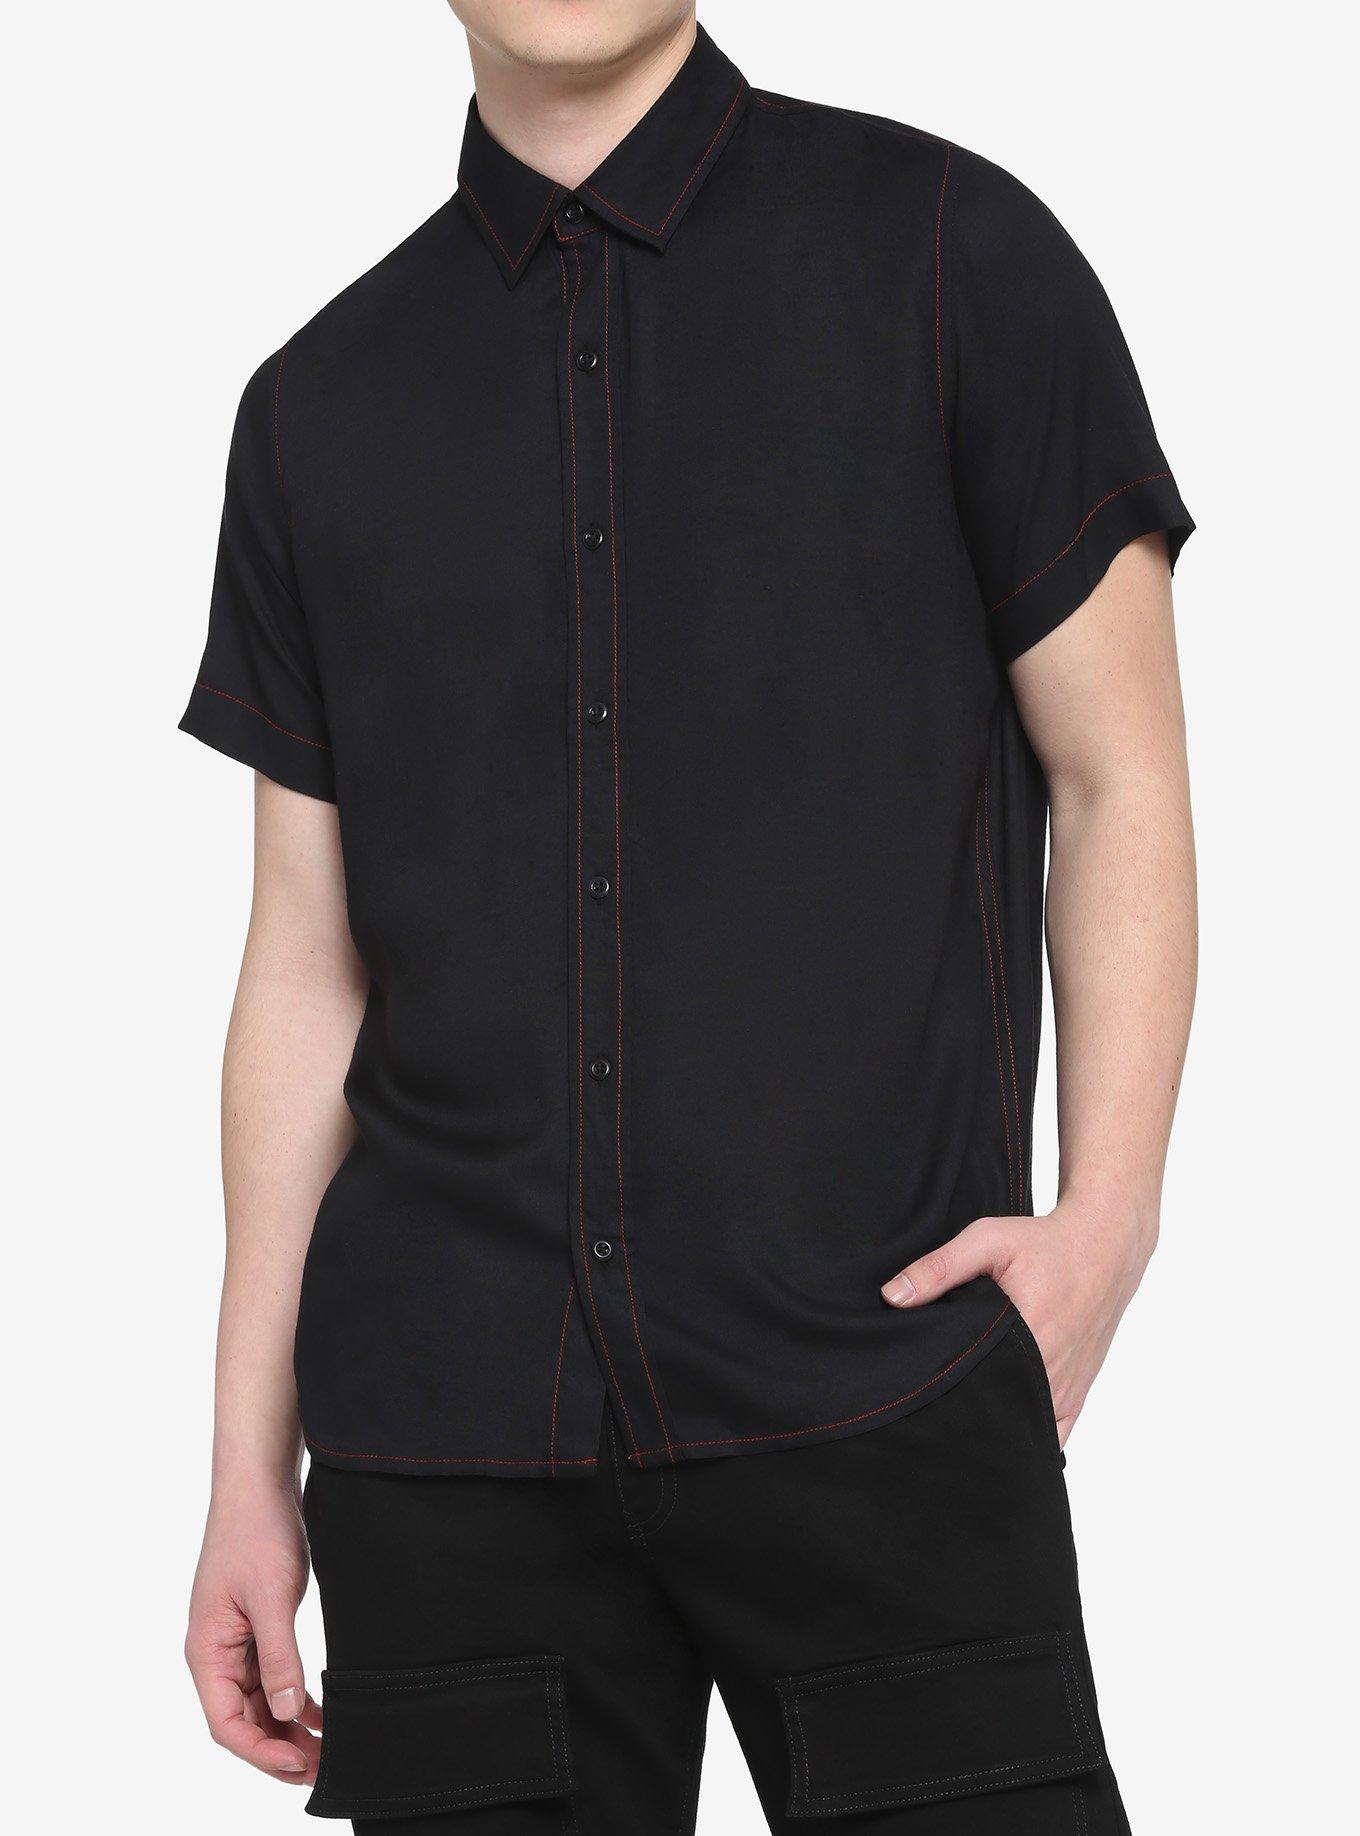 Black & Red Contrast Stitch Woven Button-Up, BLACK  RED, hi-res